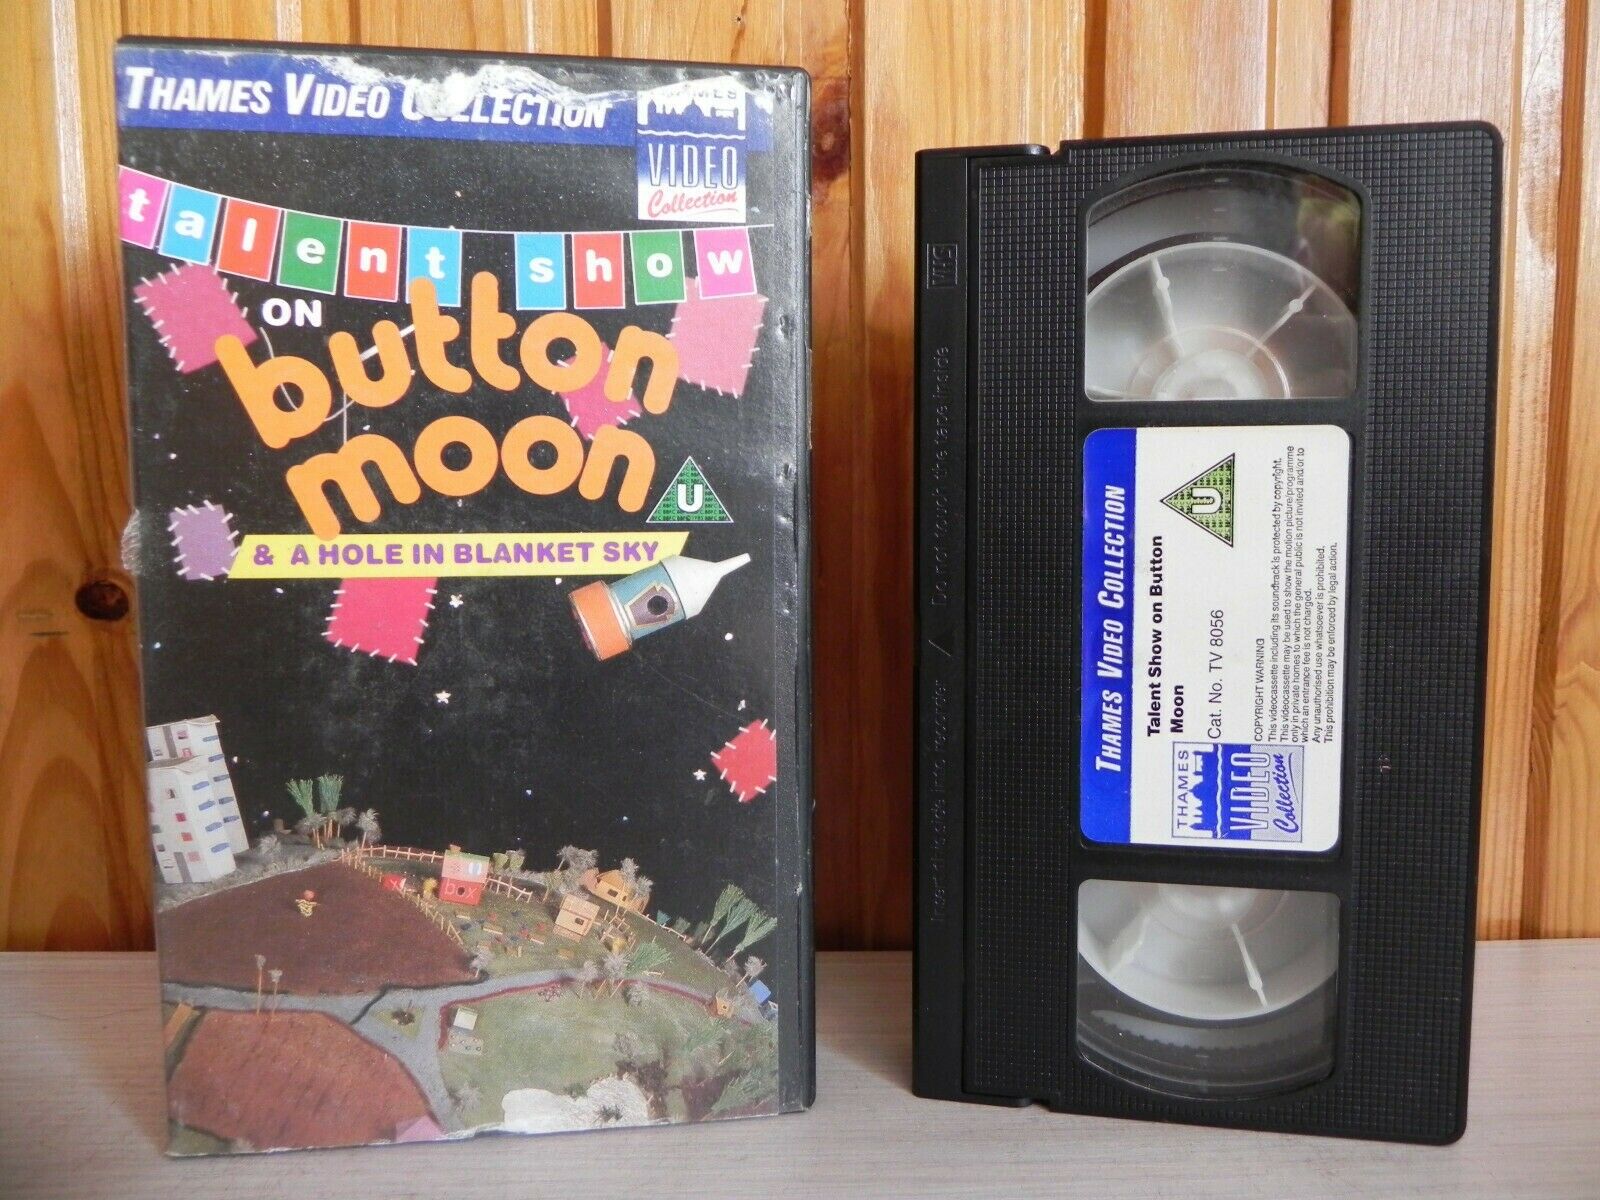 Talent Show On Button Moon - A Hole In Blanket Sky - Cartoon - Kids - Pal VHS-